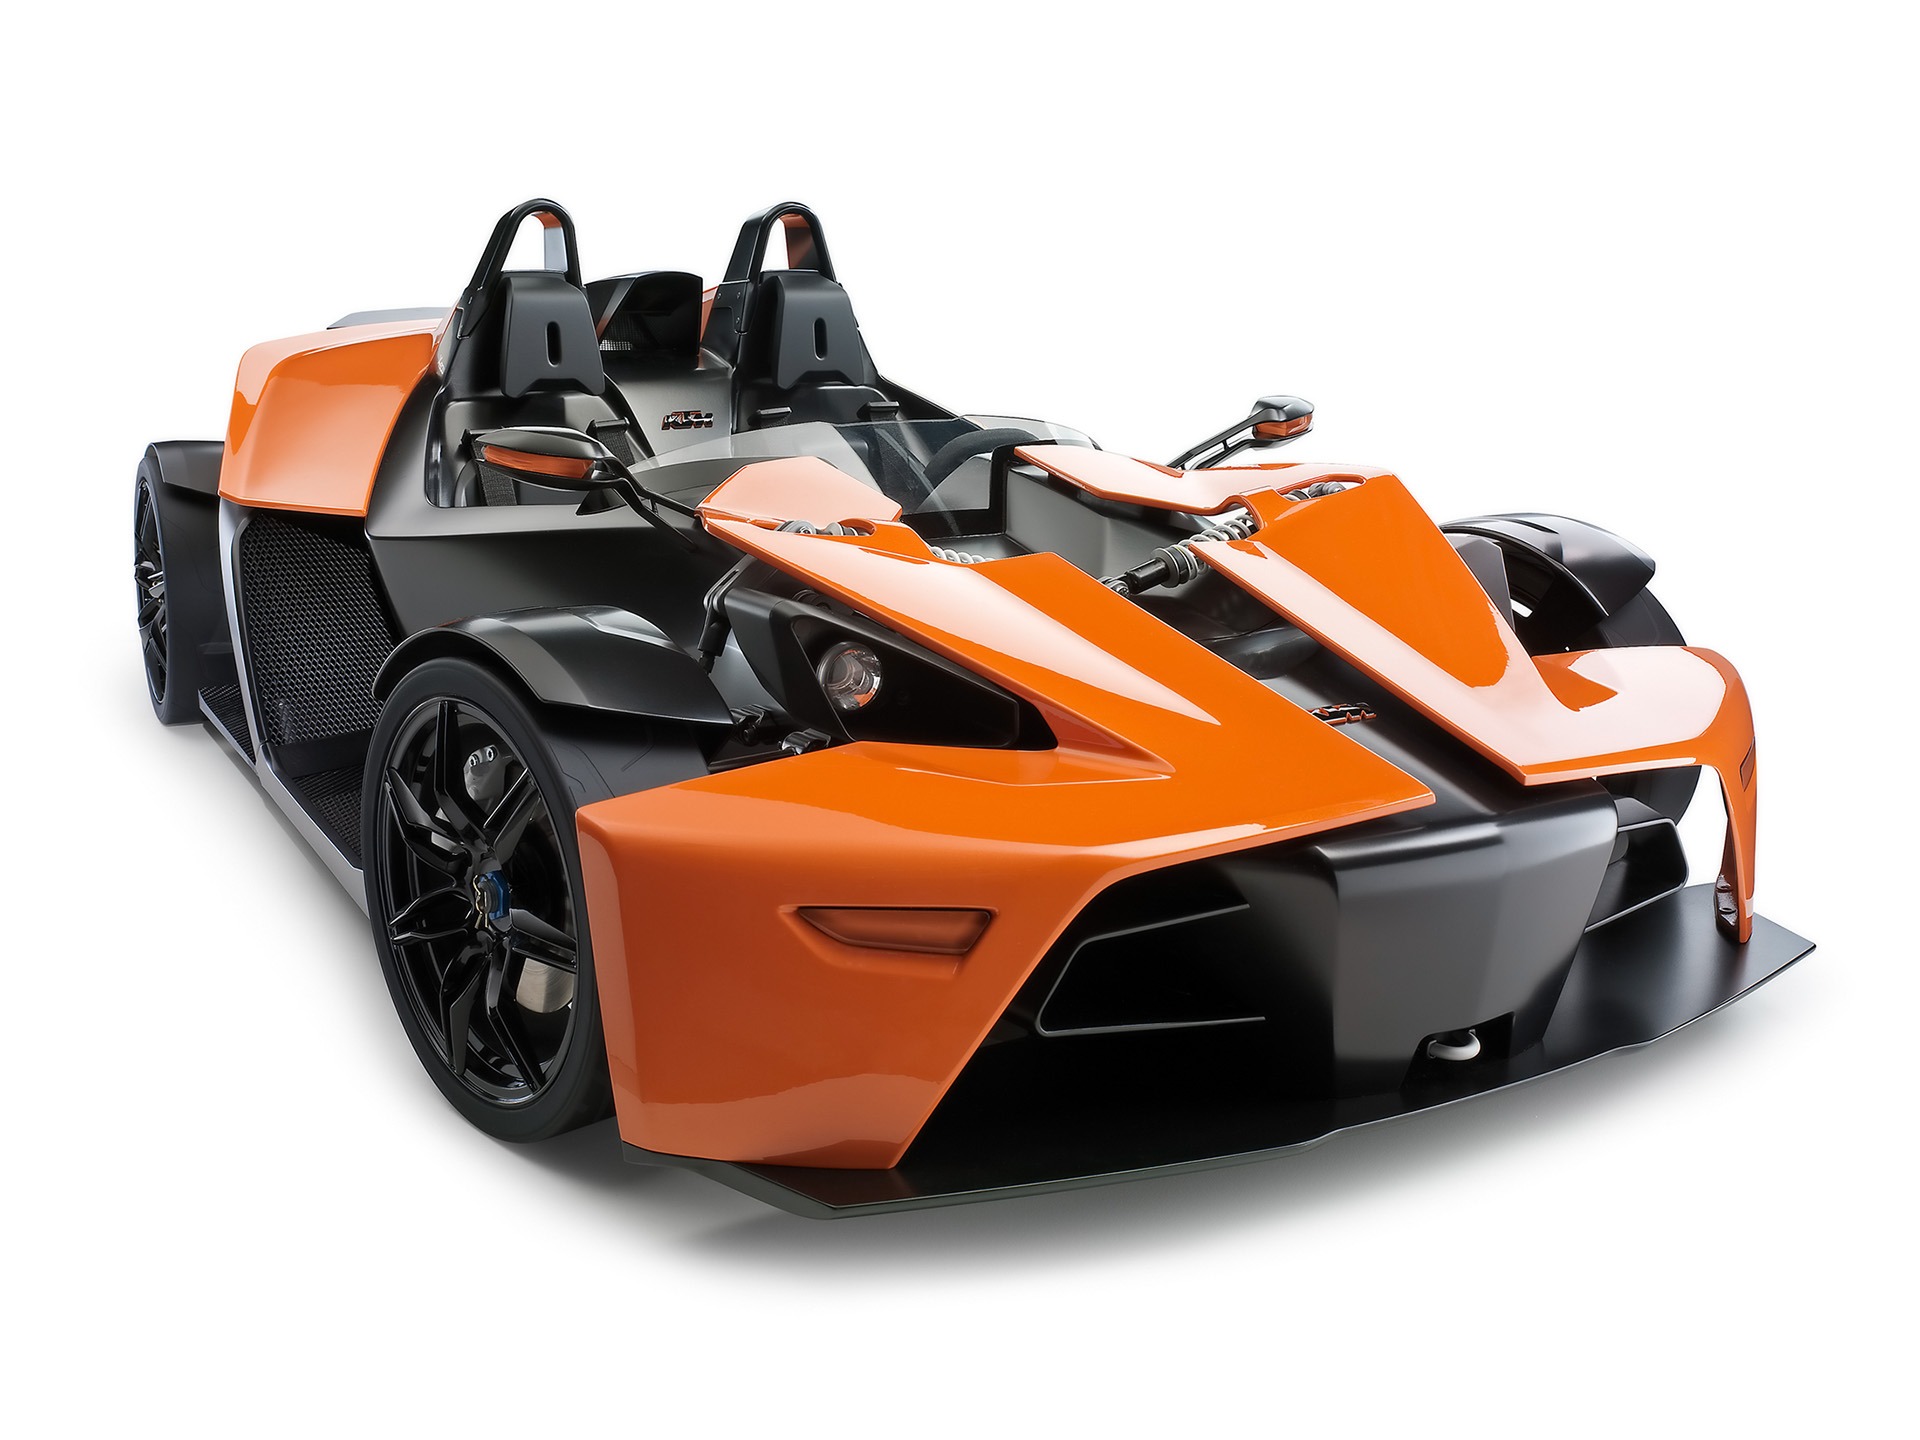 Popular Ktm X Bow Image for Phone